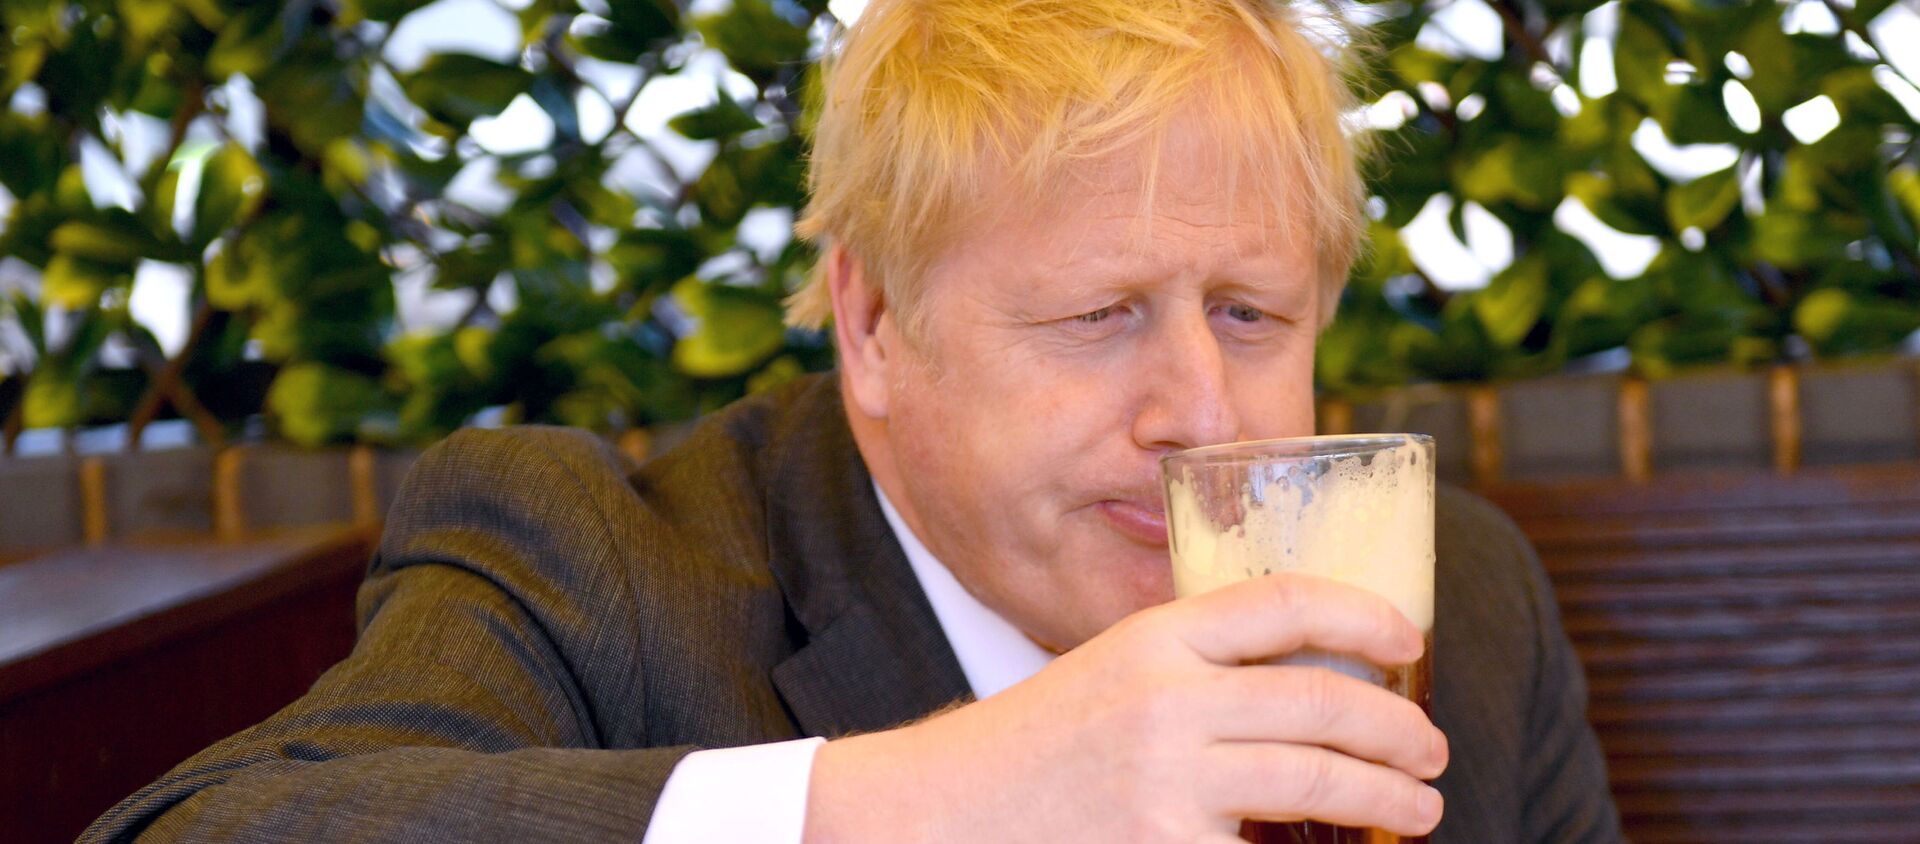 Prime Minister Boris Johnson sips a pint in the beer garden during a visit to The Mount Tavern Pub and Restaurant on the local election campaign trail in Wolverhampton, West Midlands, 19 April 2021 - Sputnik International, 1920, 20.04.2021